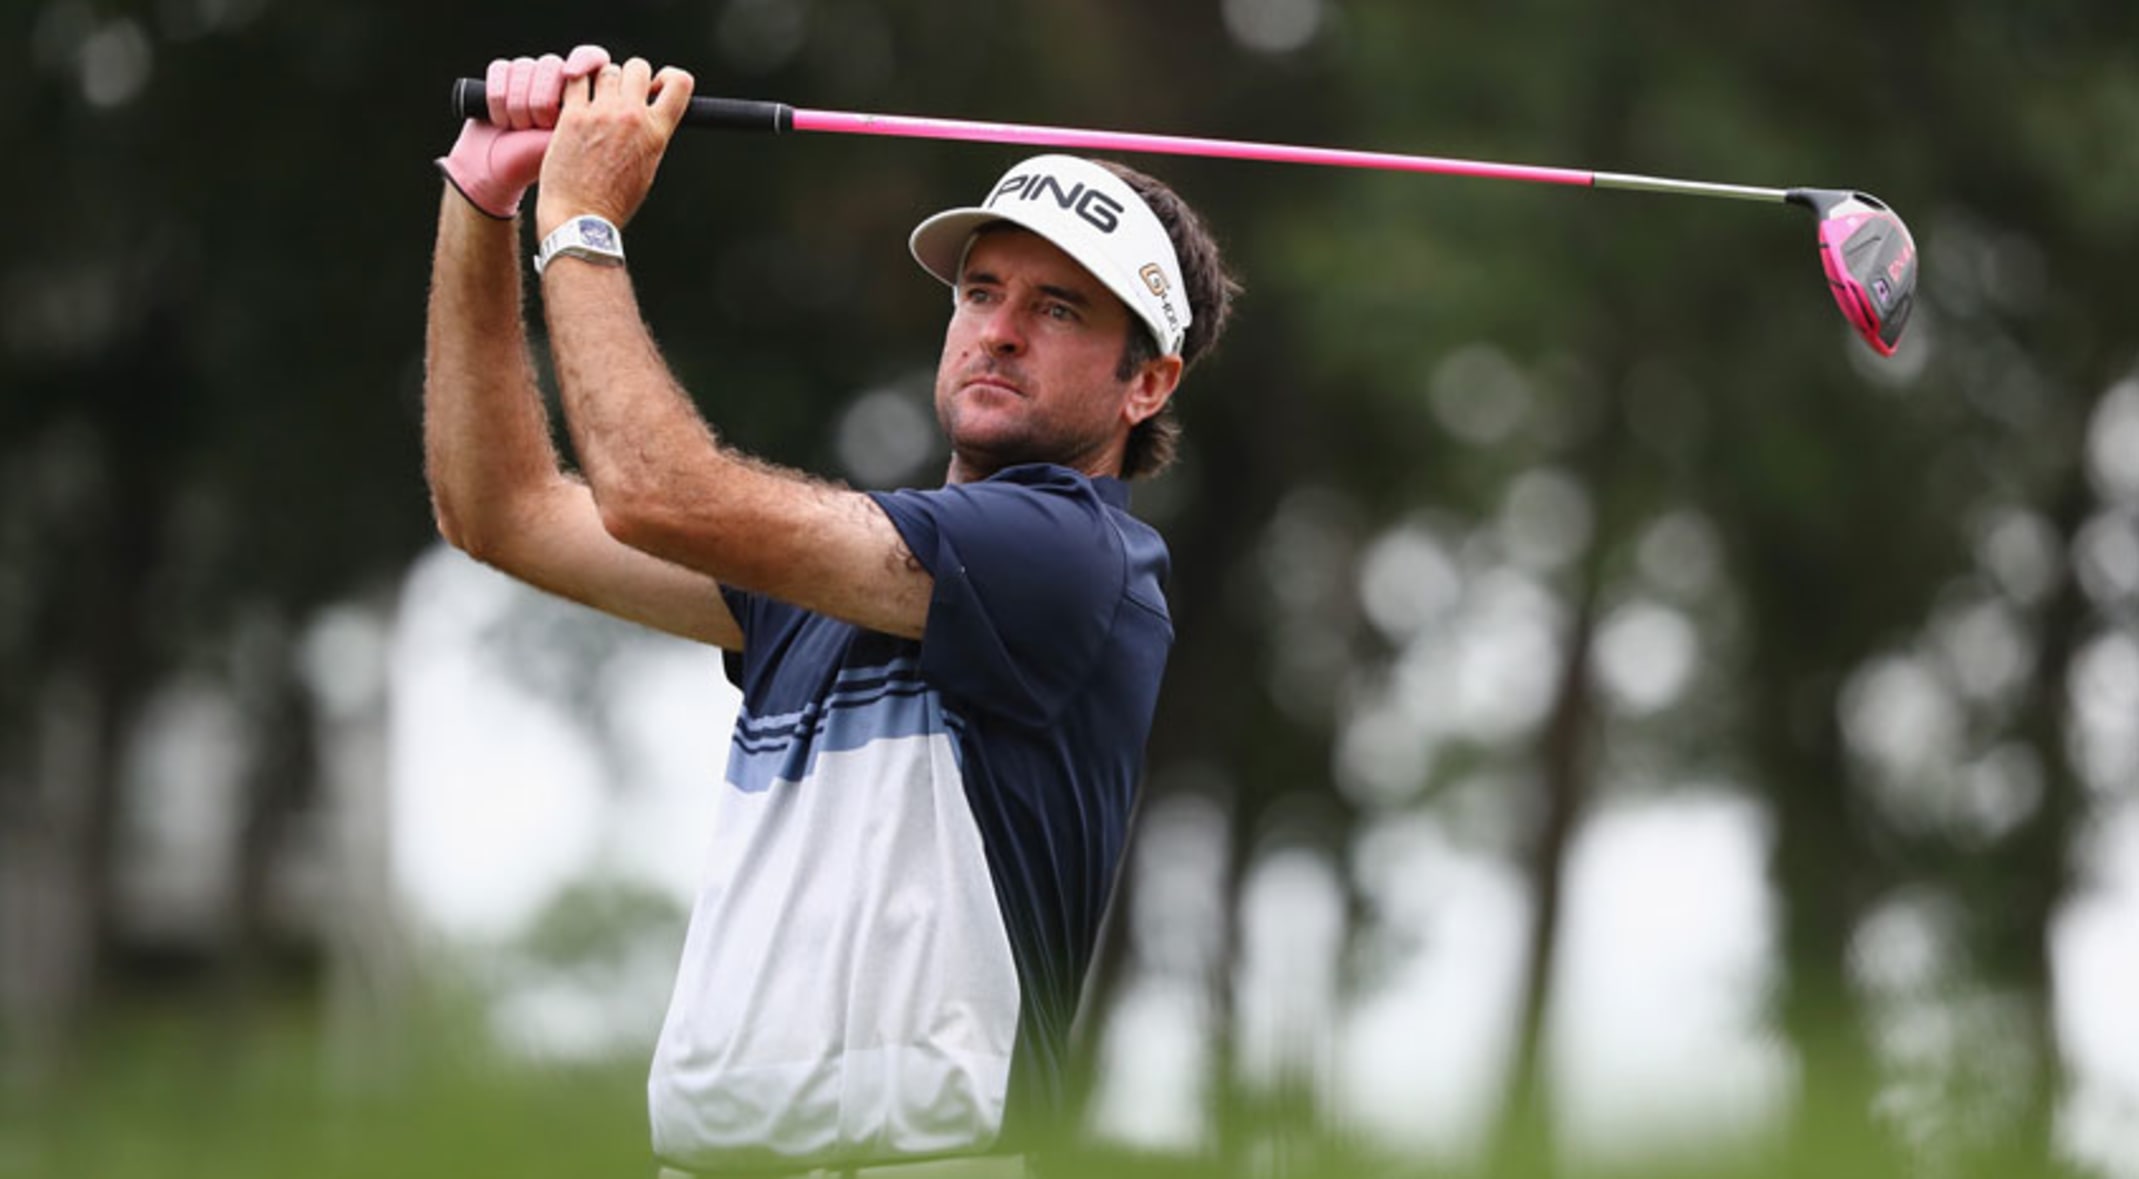 Top 30 Players to Watch in 2019: No. 8 Bubba Watson